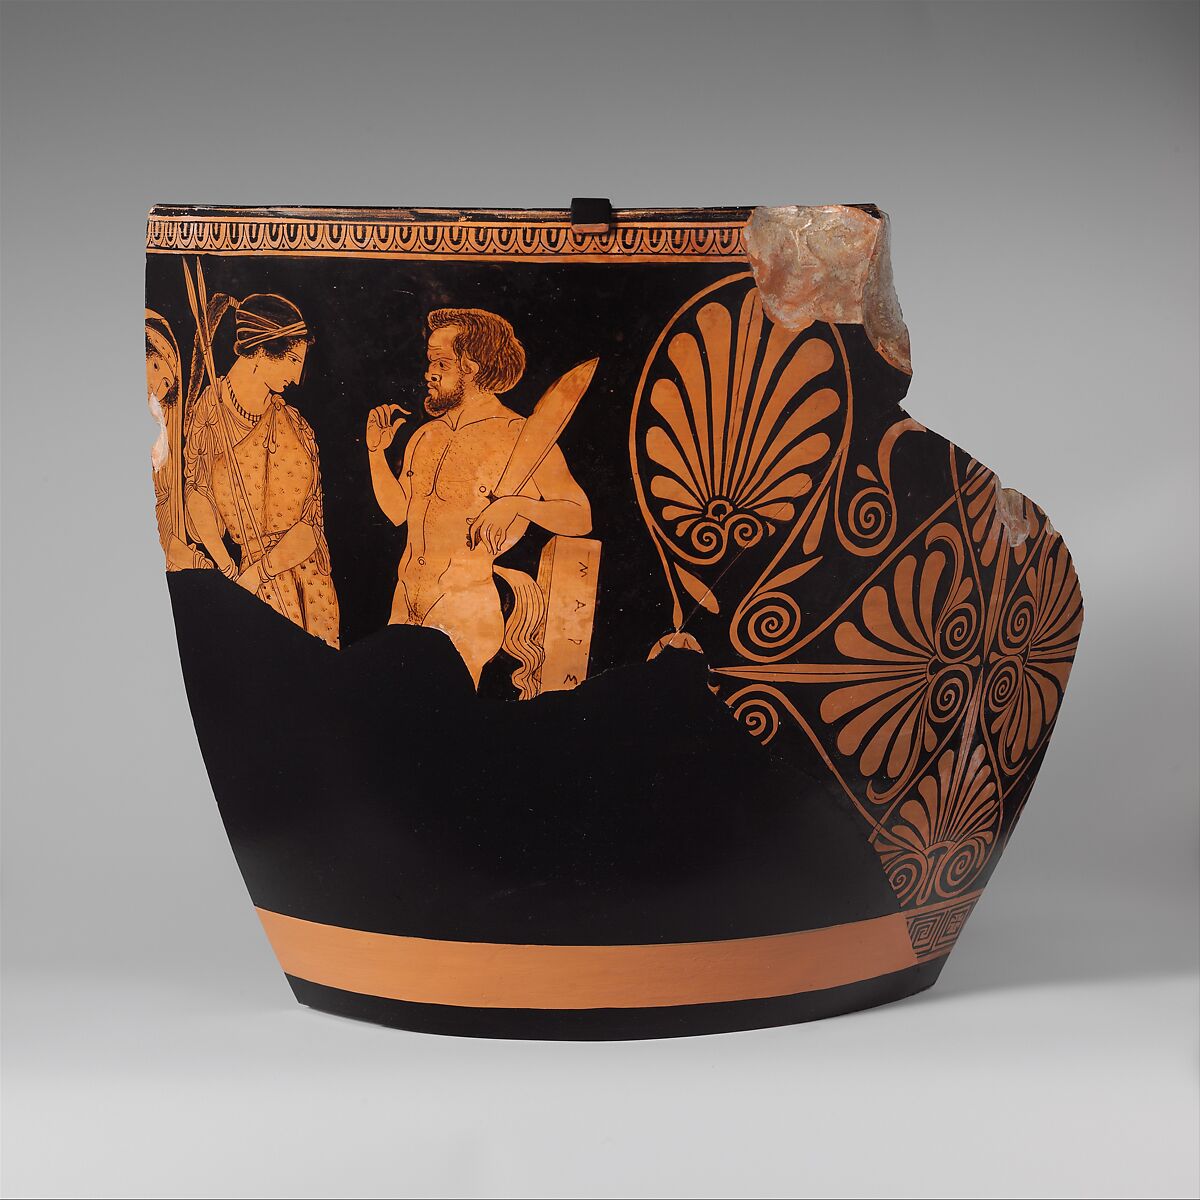 Two fragments of a terracotta skyphos (deep drinking cup)